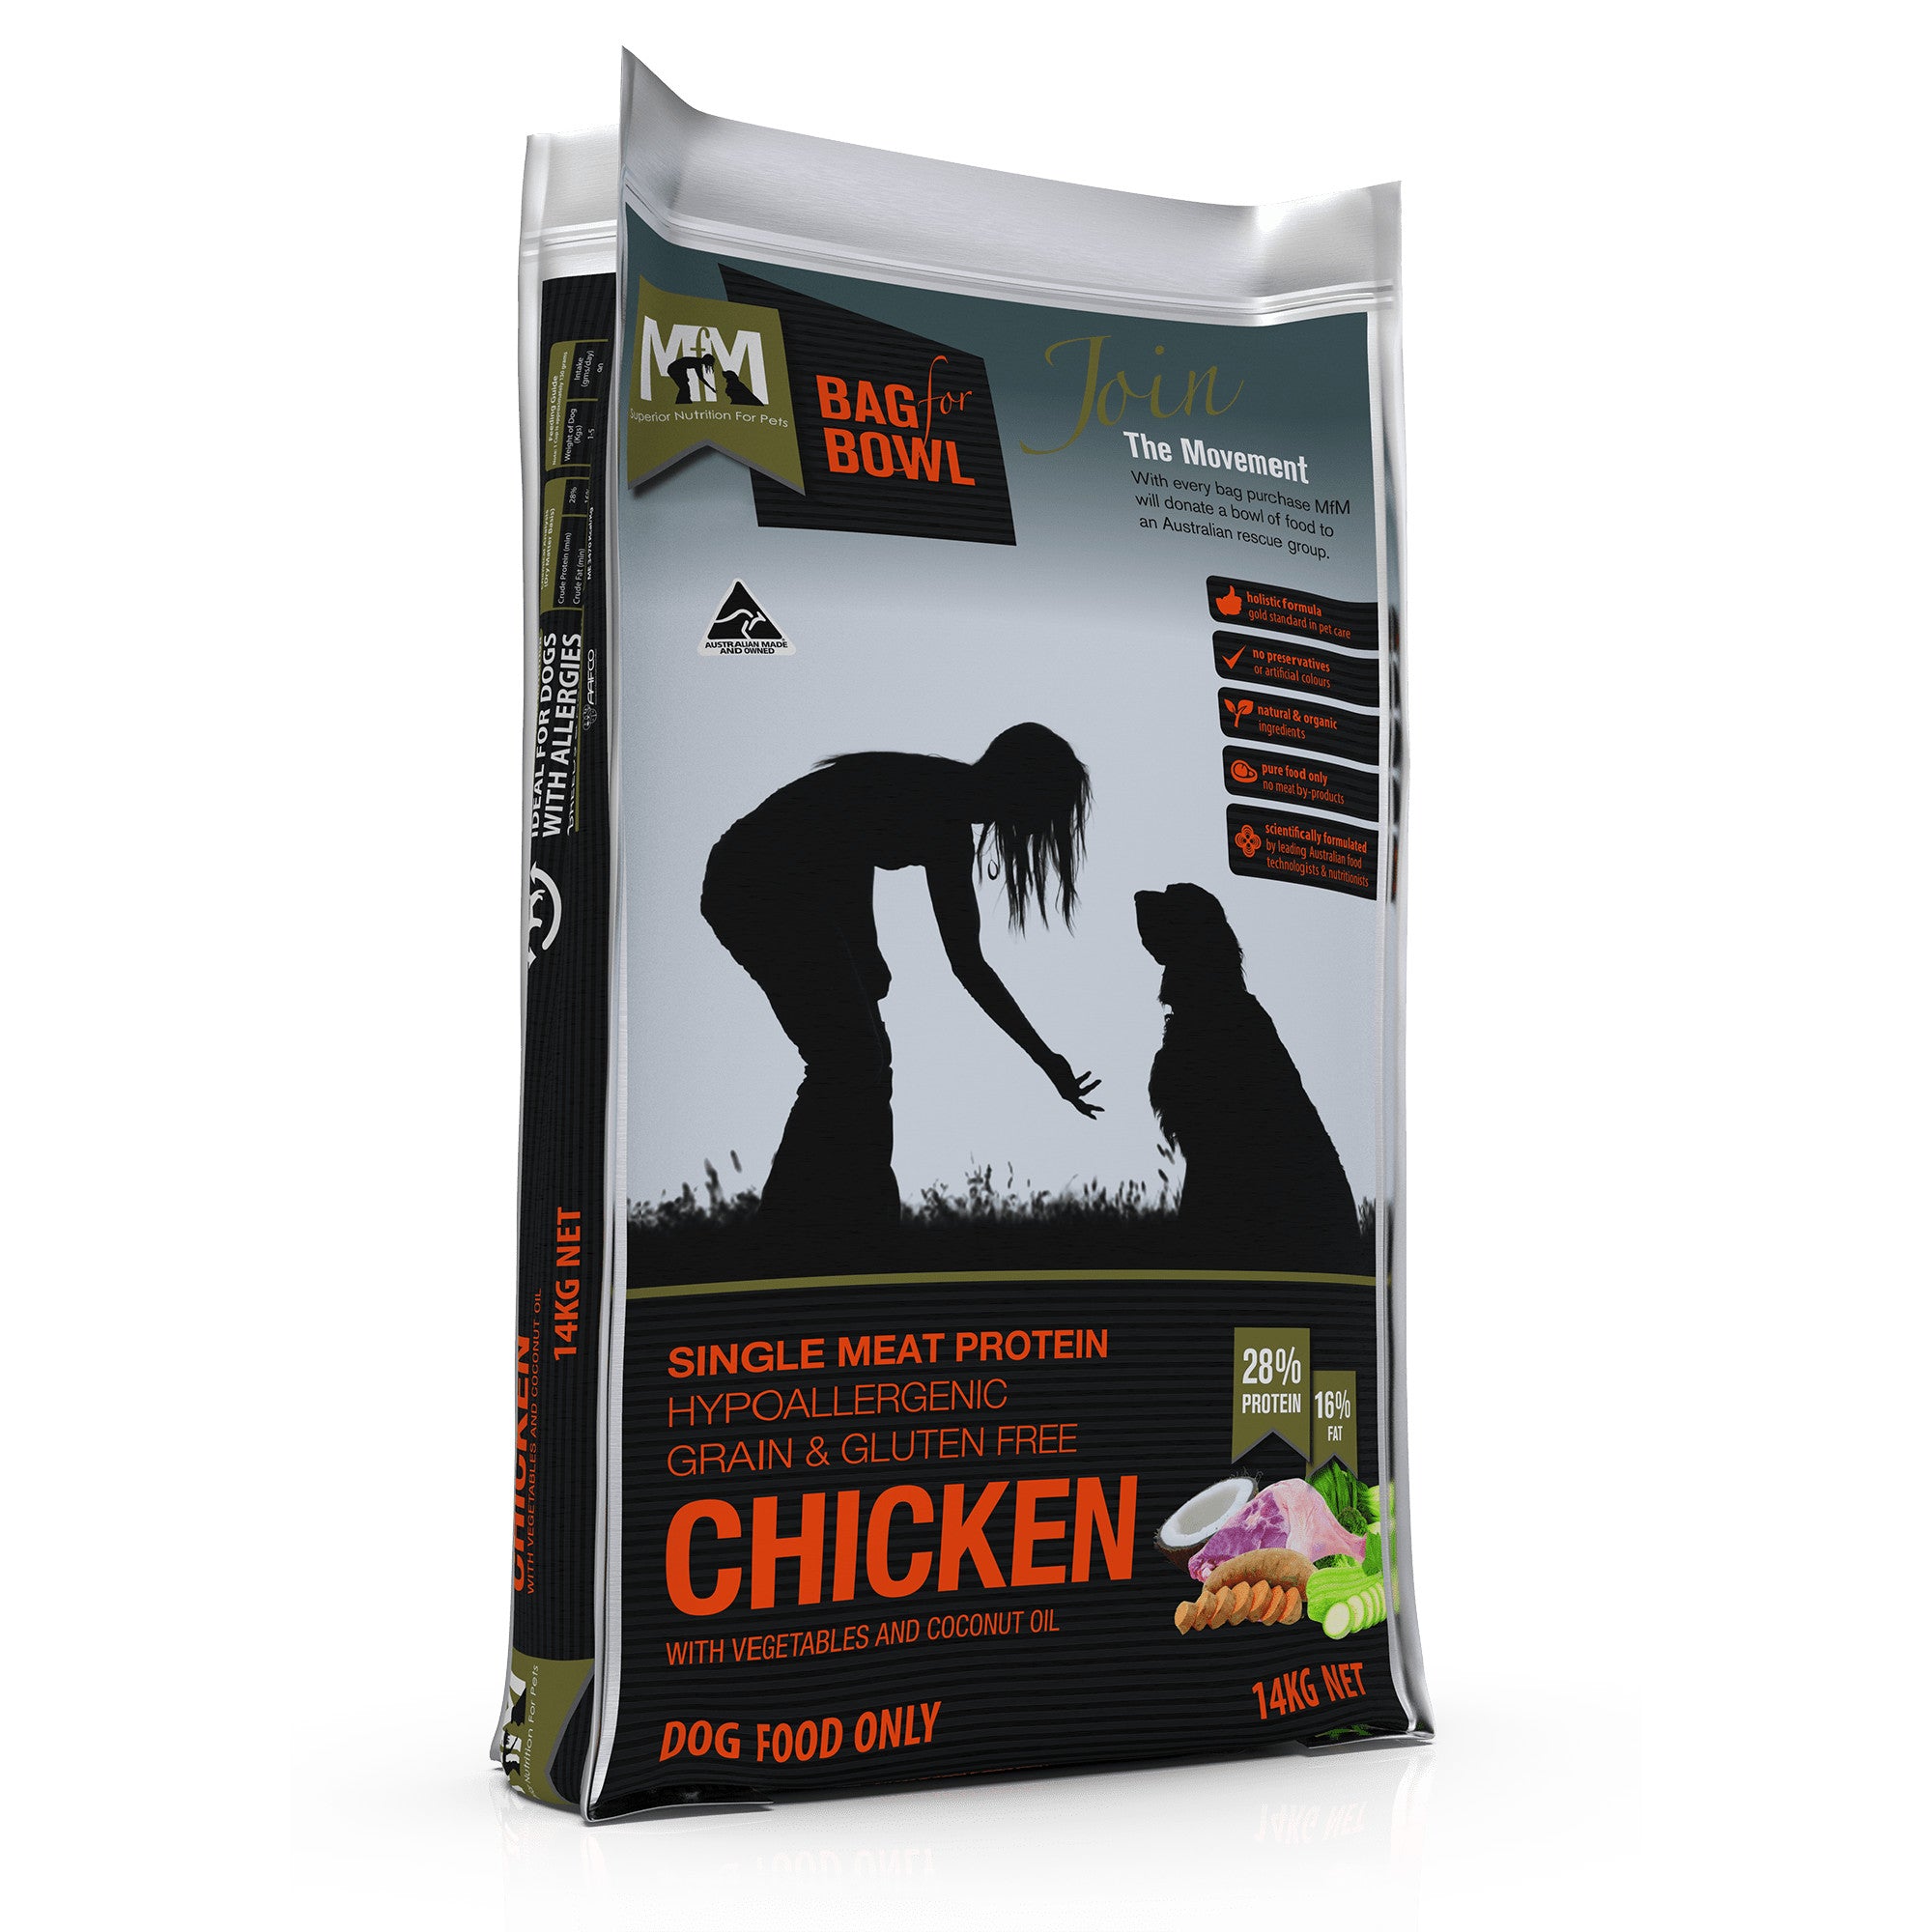 Meals for Mutts Chicken Single Meat Protein Dog Food 14kg.